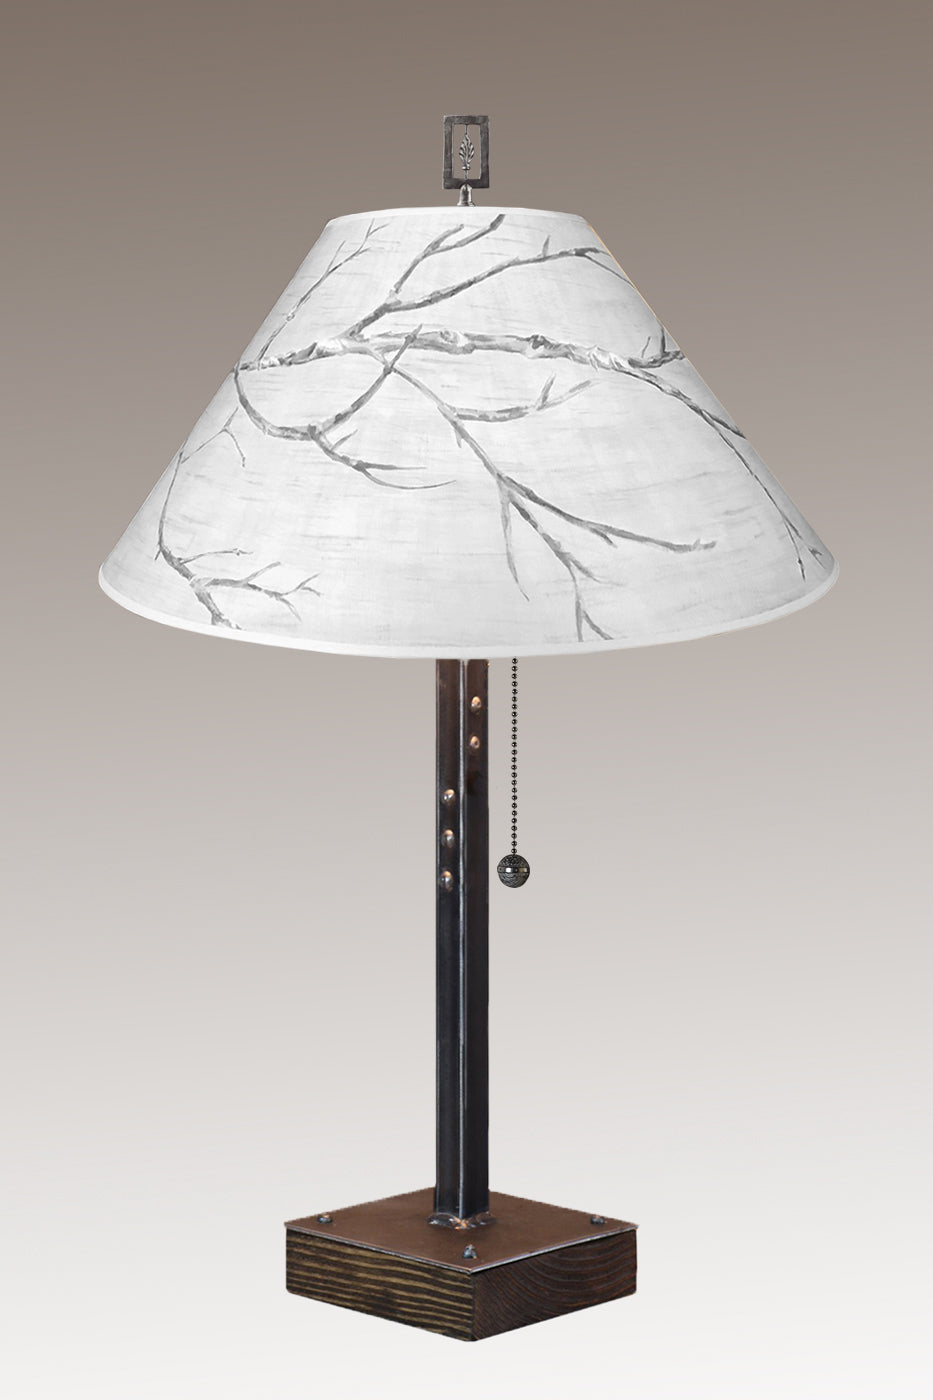 Janna Ugone & Co Table Lamps Steel Table Lamp on Wood with Large Conical Shade in Sweeping Branch